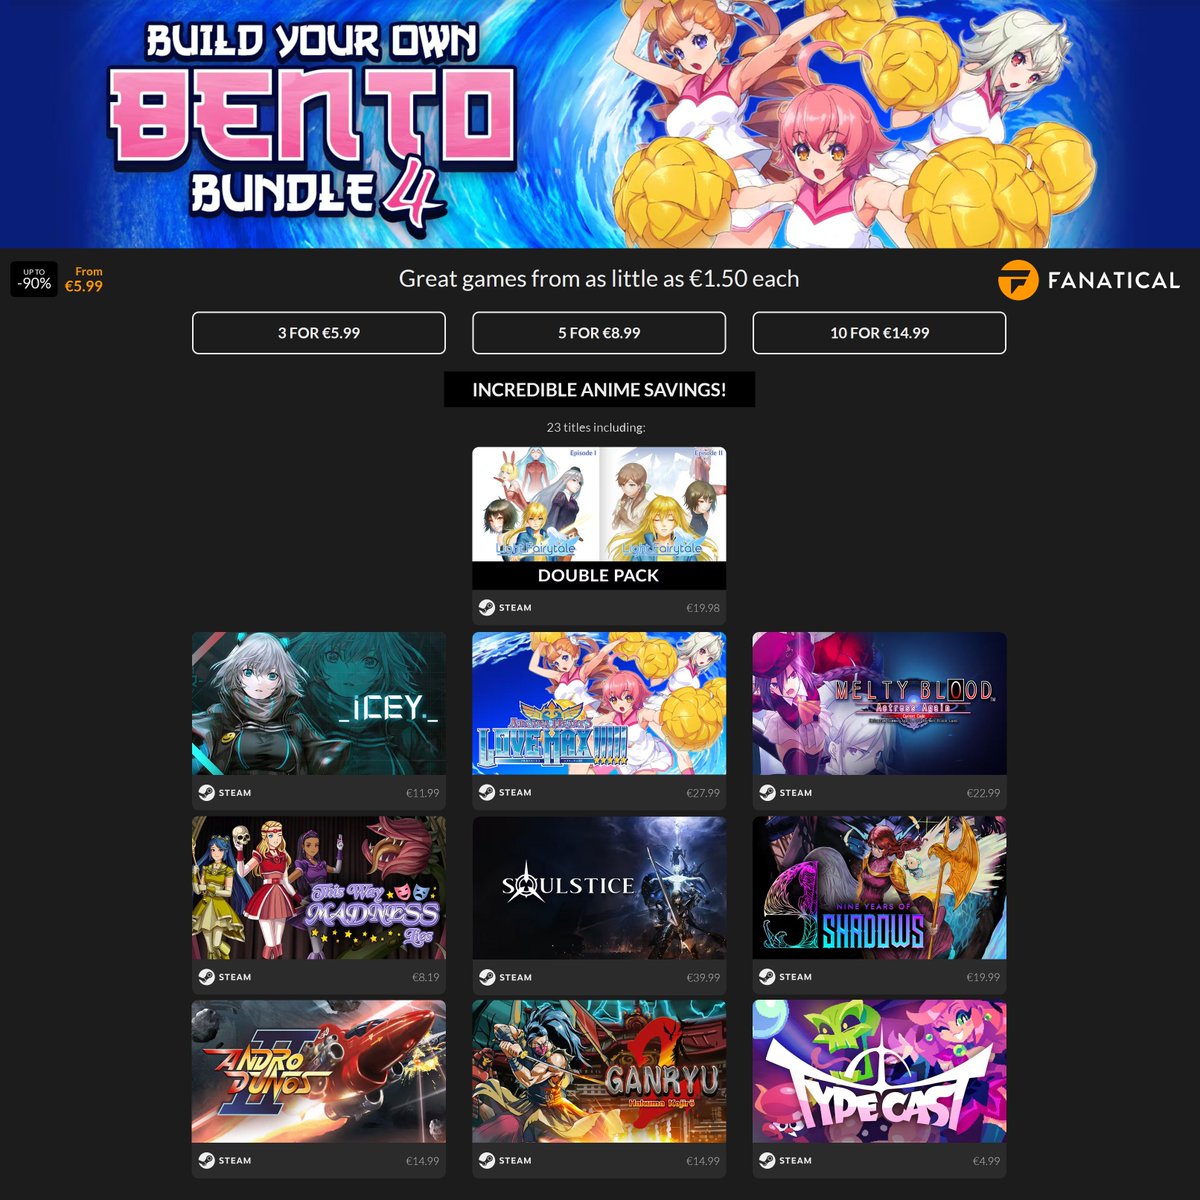 Episode 1 & 2 of my #JRPG series 'Light Fairytale' are now included in the latest 'Bento' bundle @Fanatical: fanatical.com/en/pick-and-mi… #LightFairytale #Steam #Fanatical #PCGaming #RPG #Anime #Bundle #Gaming #Deals #IndieGames #GamingOnLinux #SteamDeck #Sales